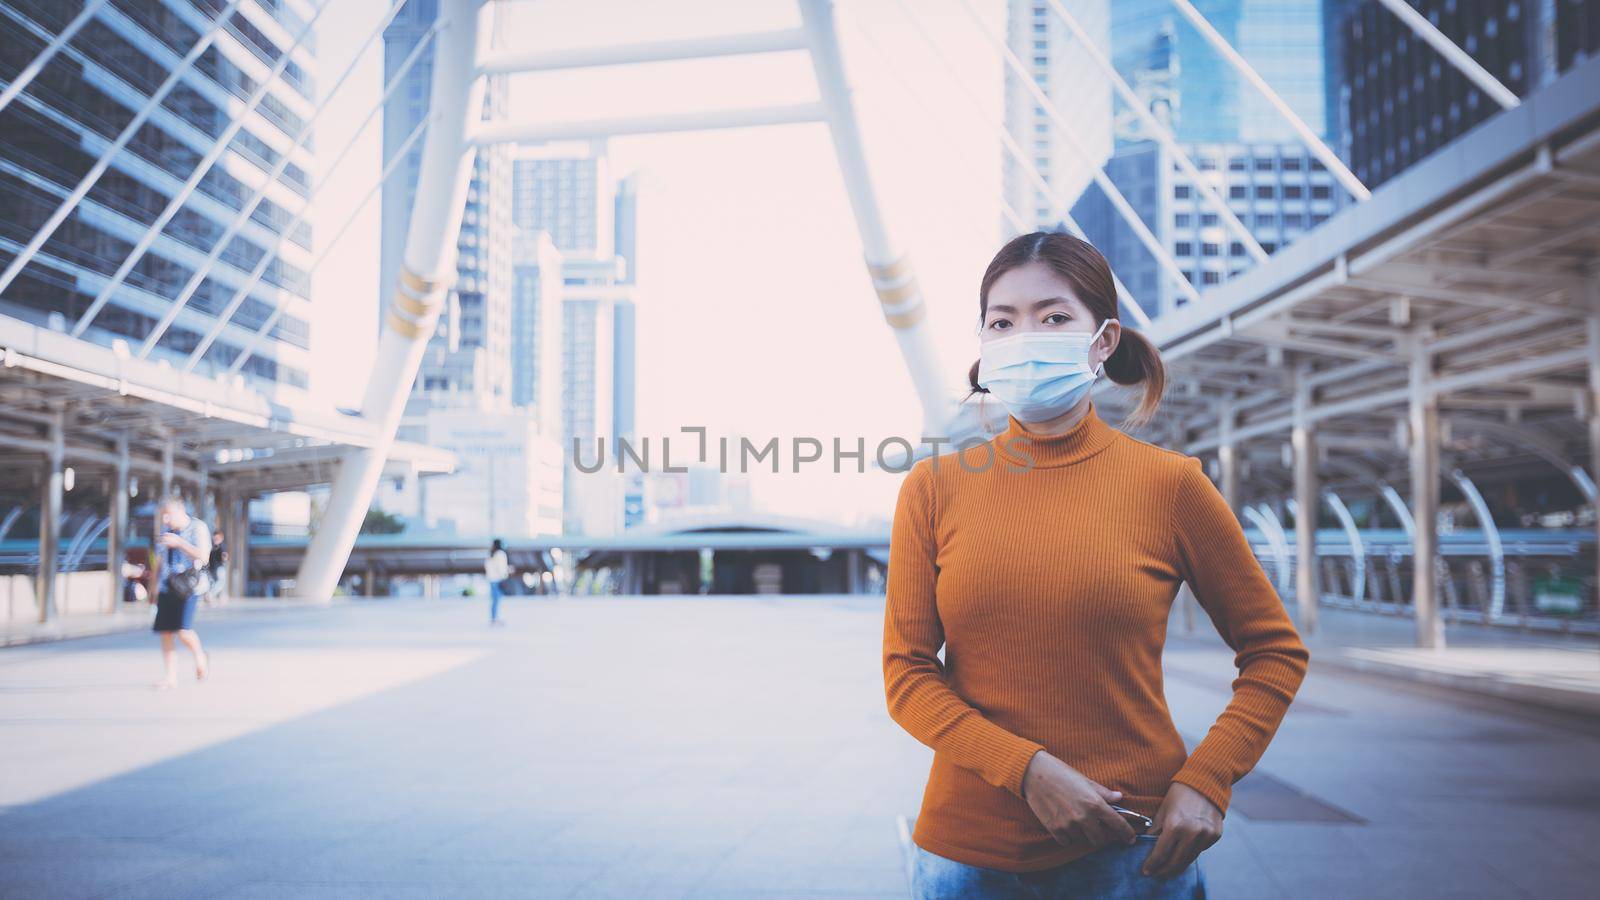 Young woman wearing protective face mask outdoors in city street. New Normal life after COVID-19 and health protocols to avoid infections and the virus spread in public spaces. Thailand